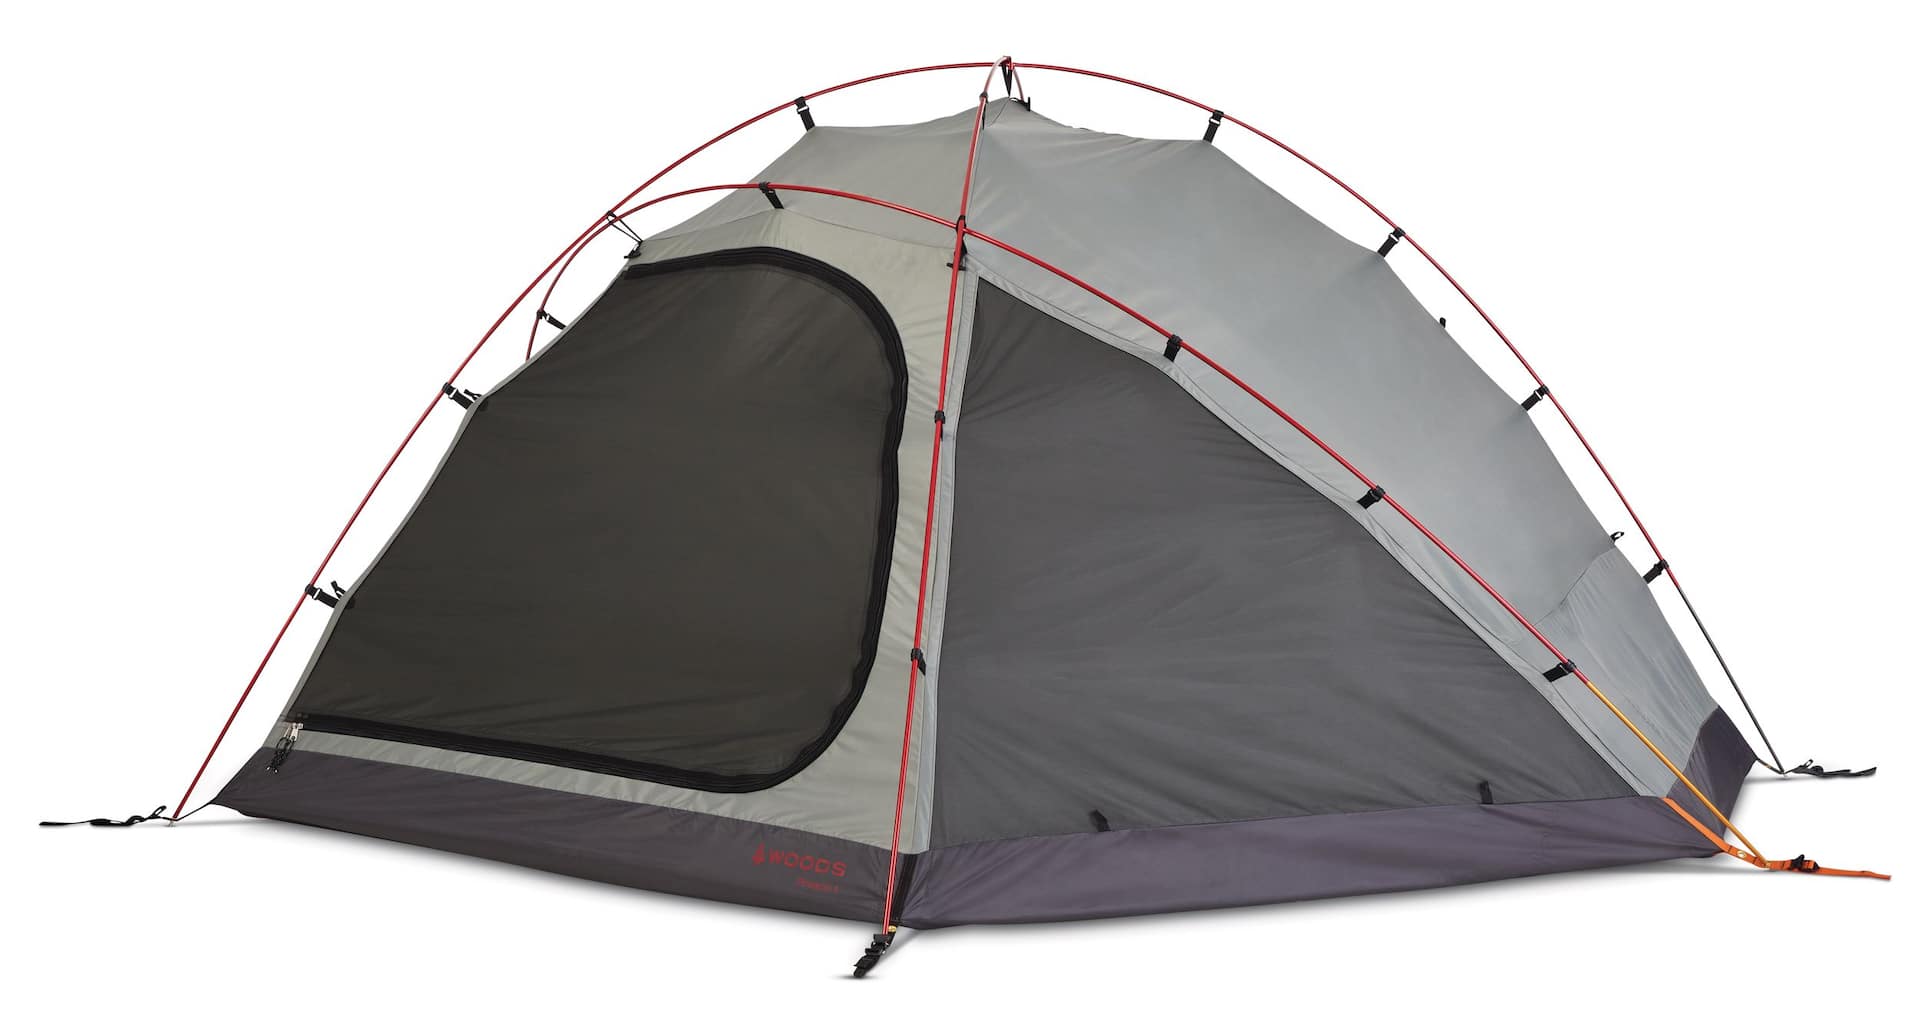 Woods Pinnacle 4-Season, 4-Person Lightweight Camping Dome Tent w